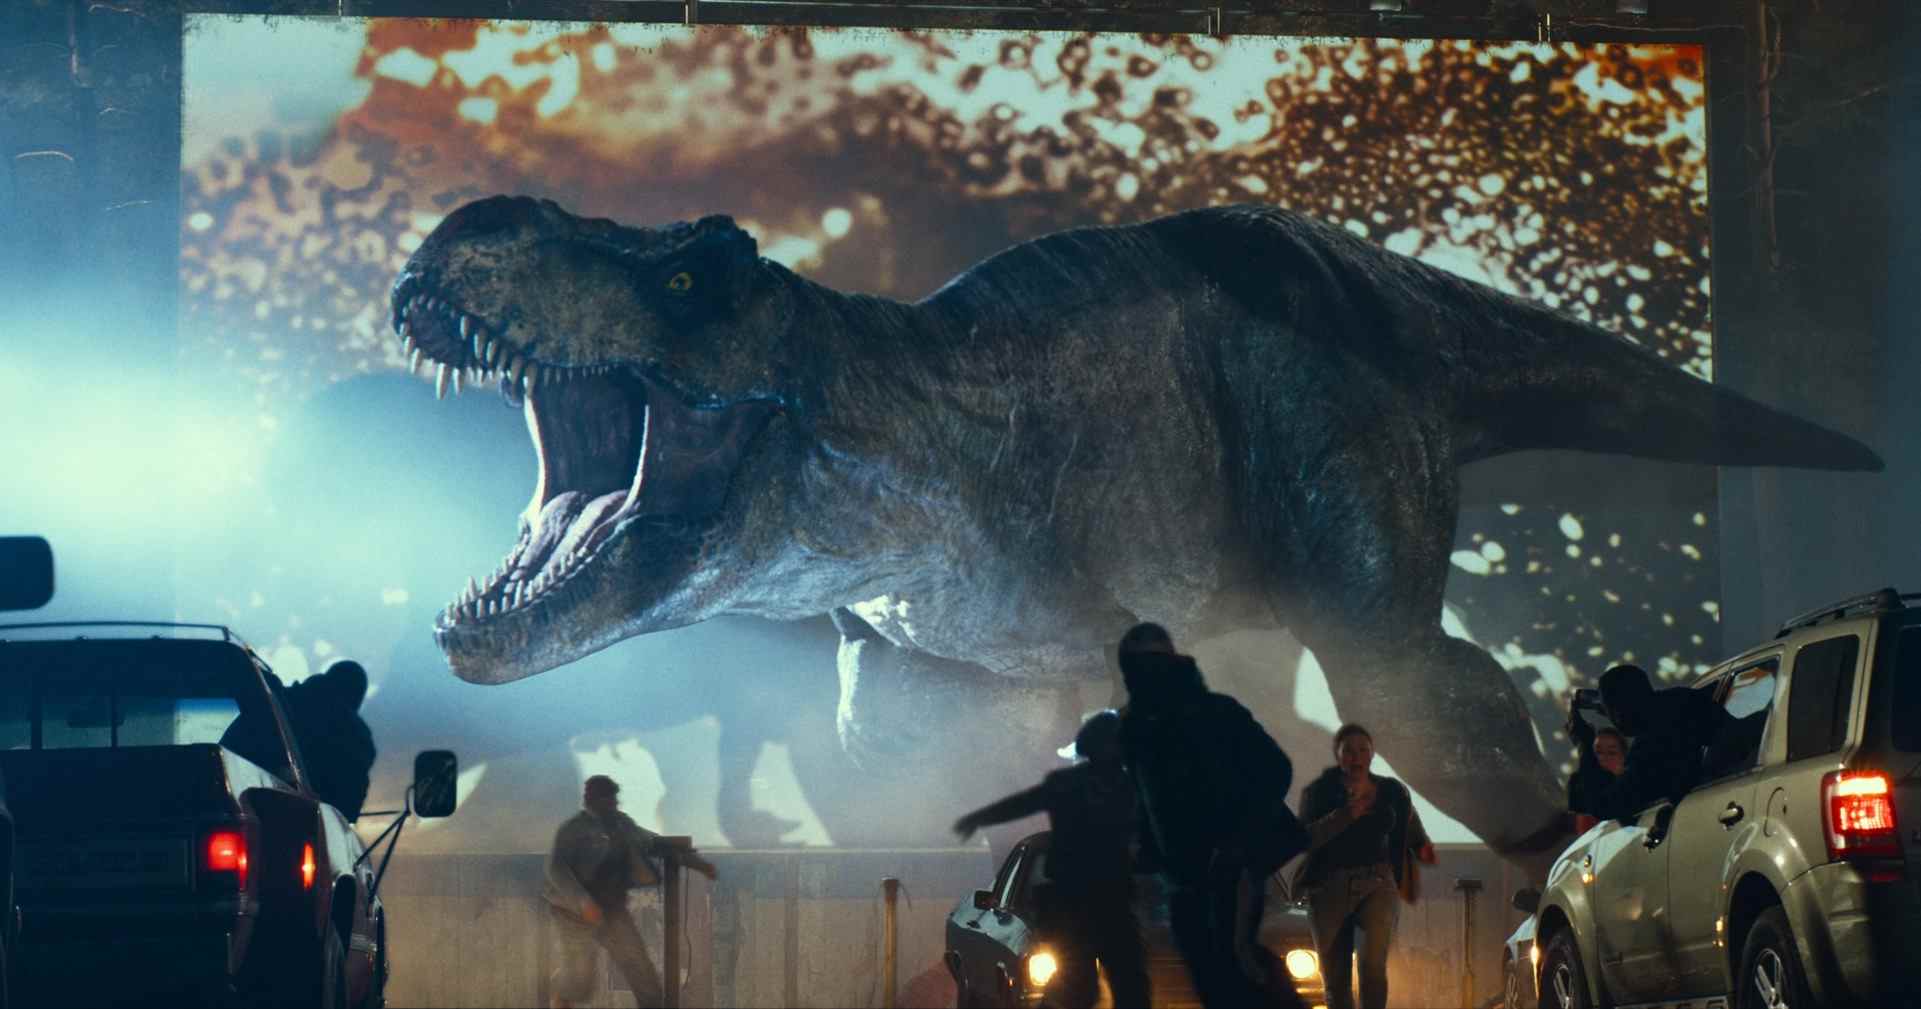 Jurassic World Dominion Is Everything Wrong with Modern Franchise Filmmaking in sequels, Part 2 II, etc., iconographie et images sans âme, juste du contenu